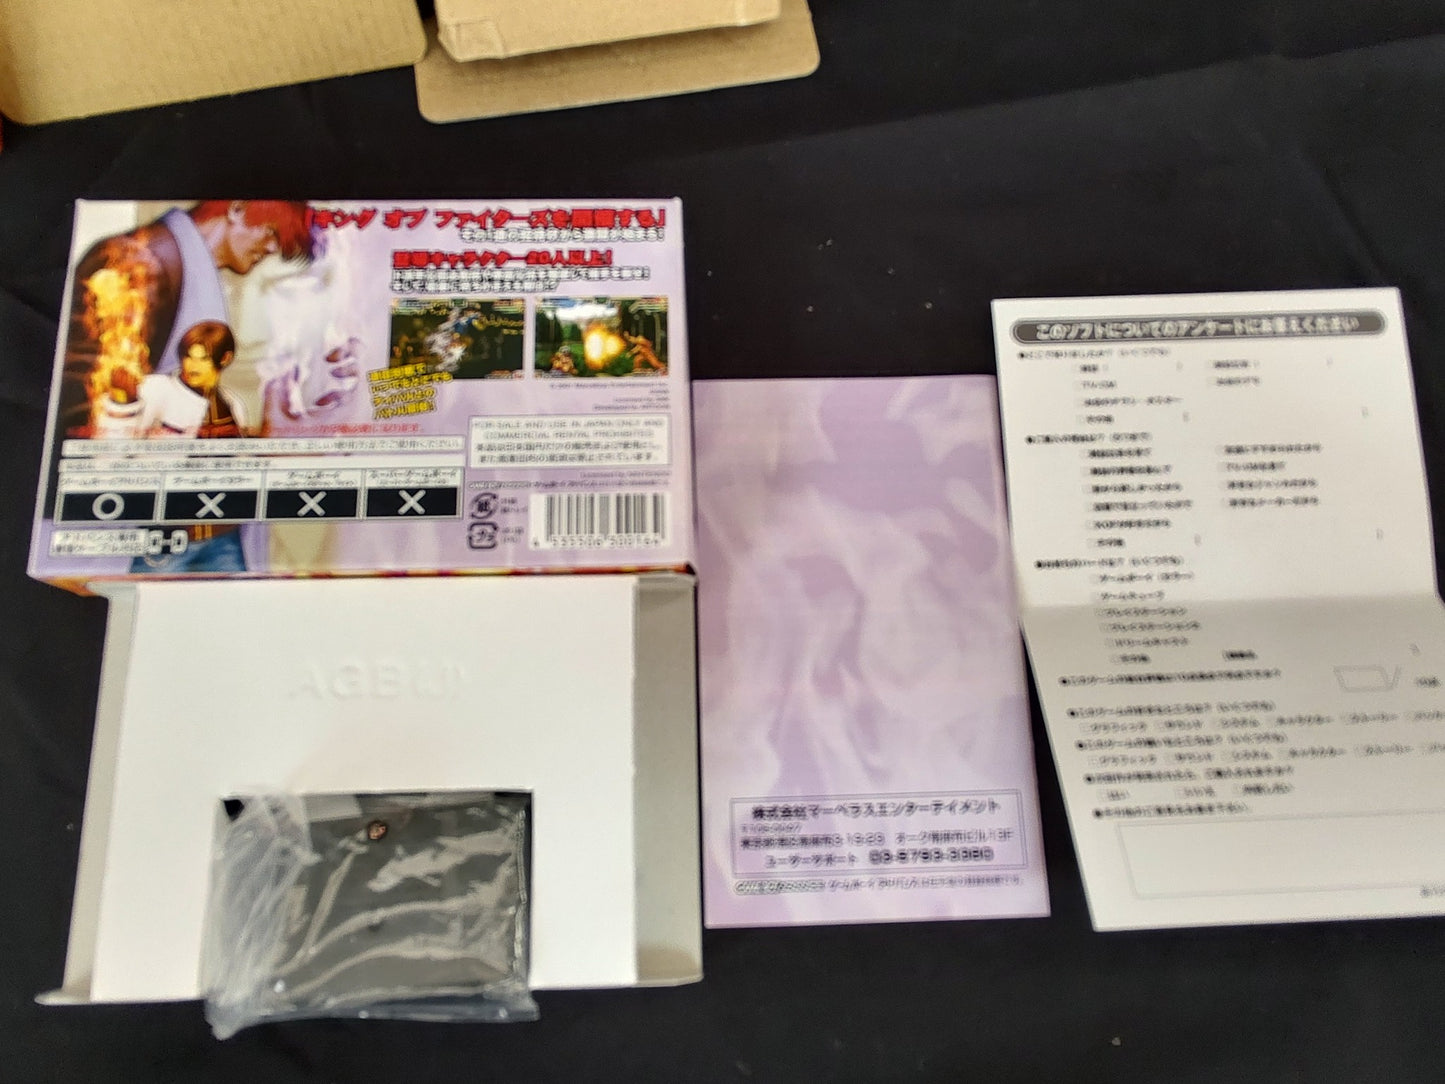 The King of Fighters EX LIMITED EDITION GAMEBOY ADVANCE GBA KOF, working -f0116-